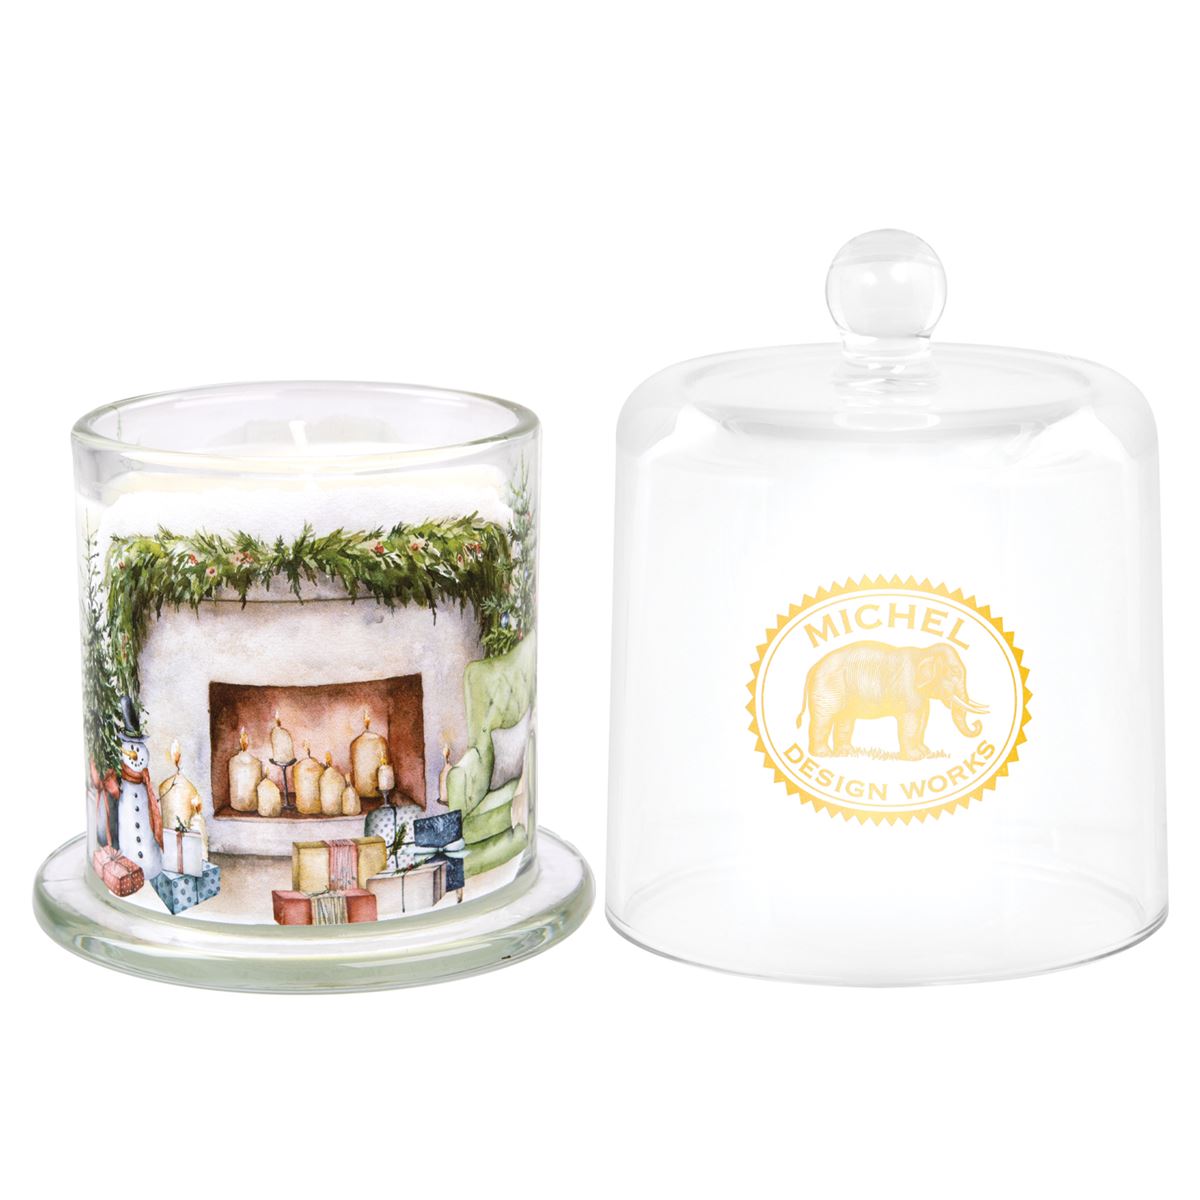 Michel Design Works Clouche Candle By The Hearth